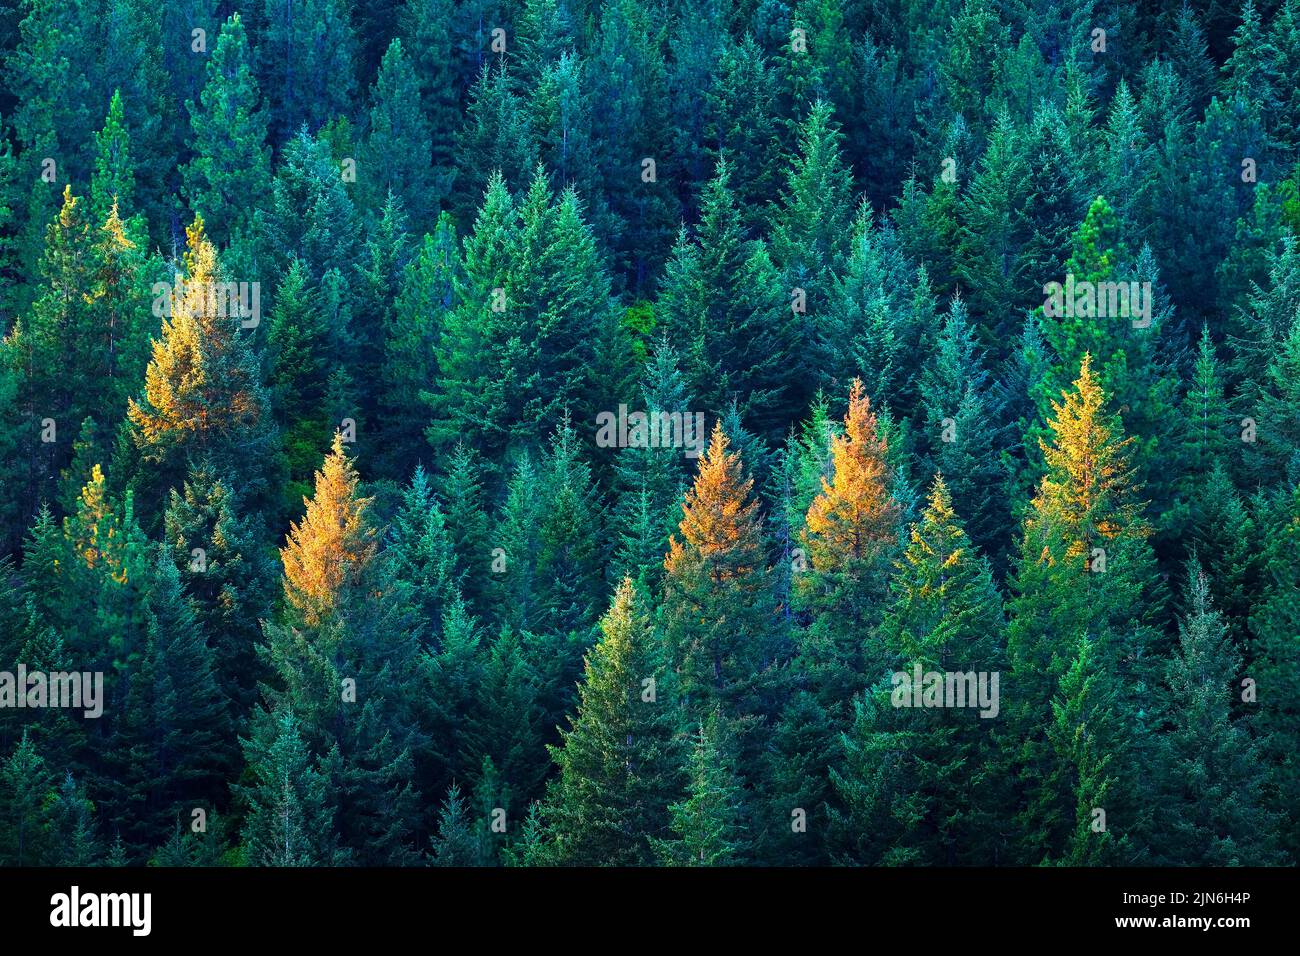 Lush pine tree forest in golden evening light Stock Photo